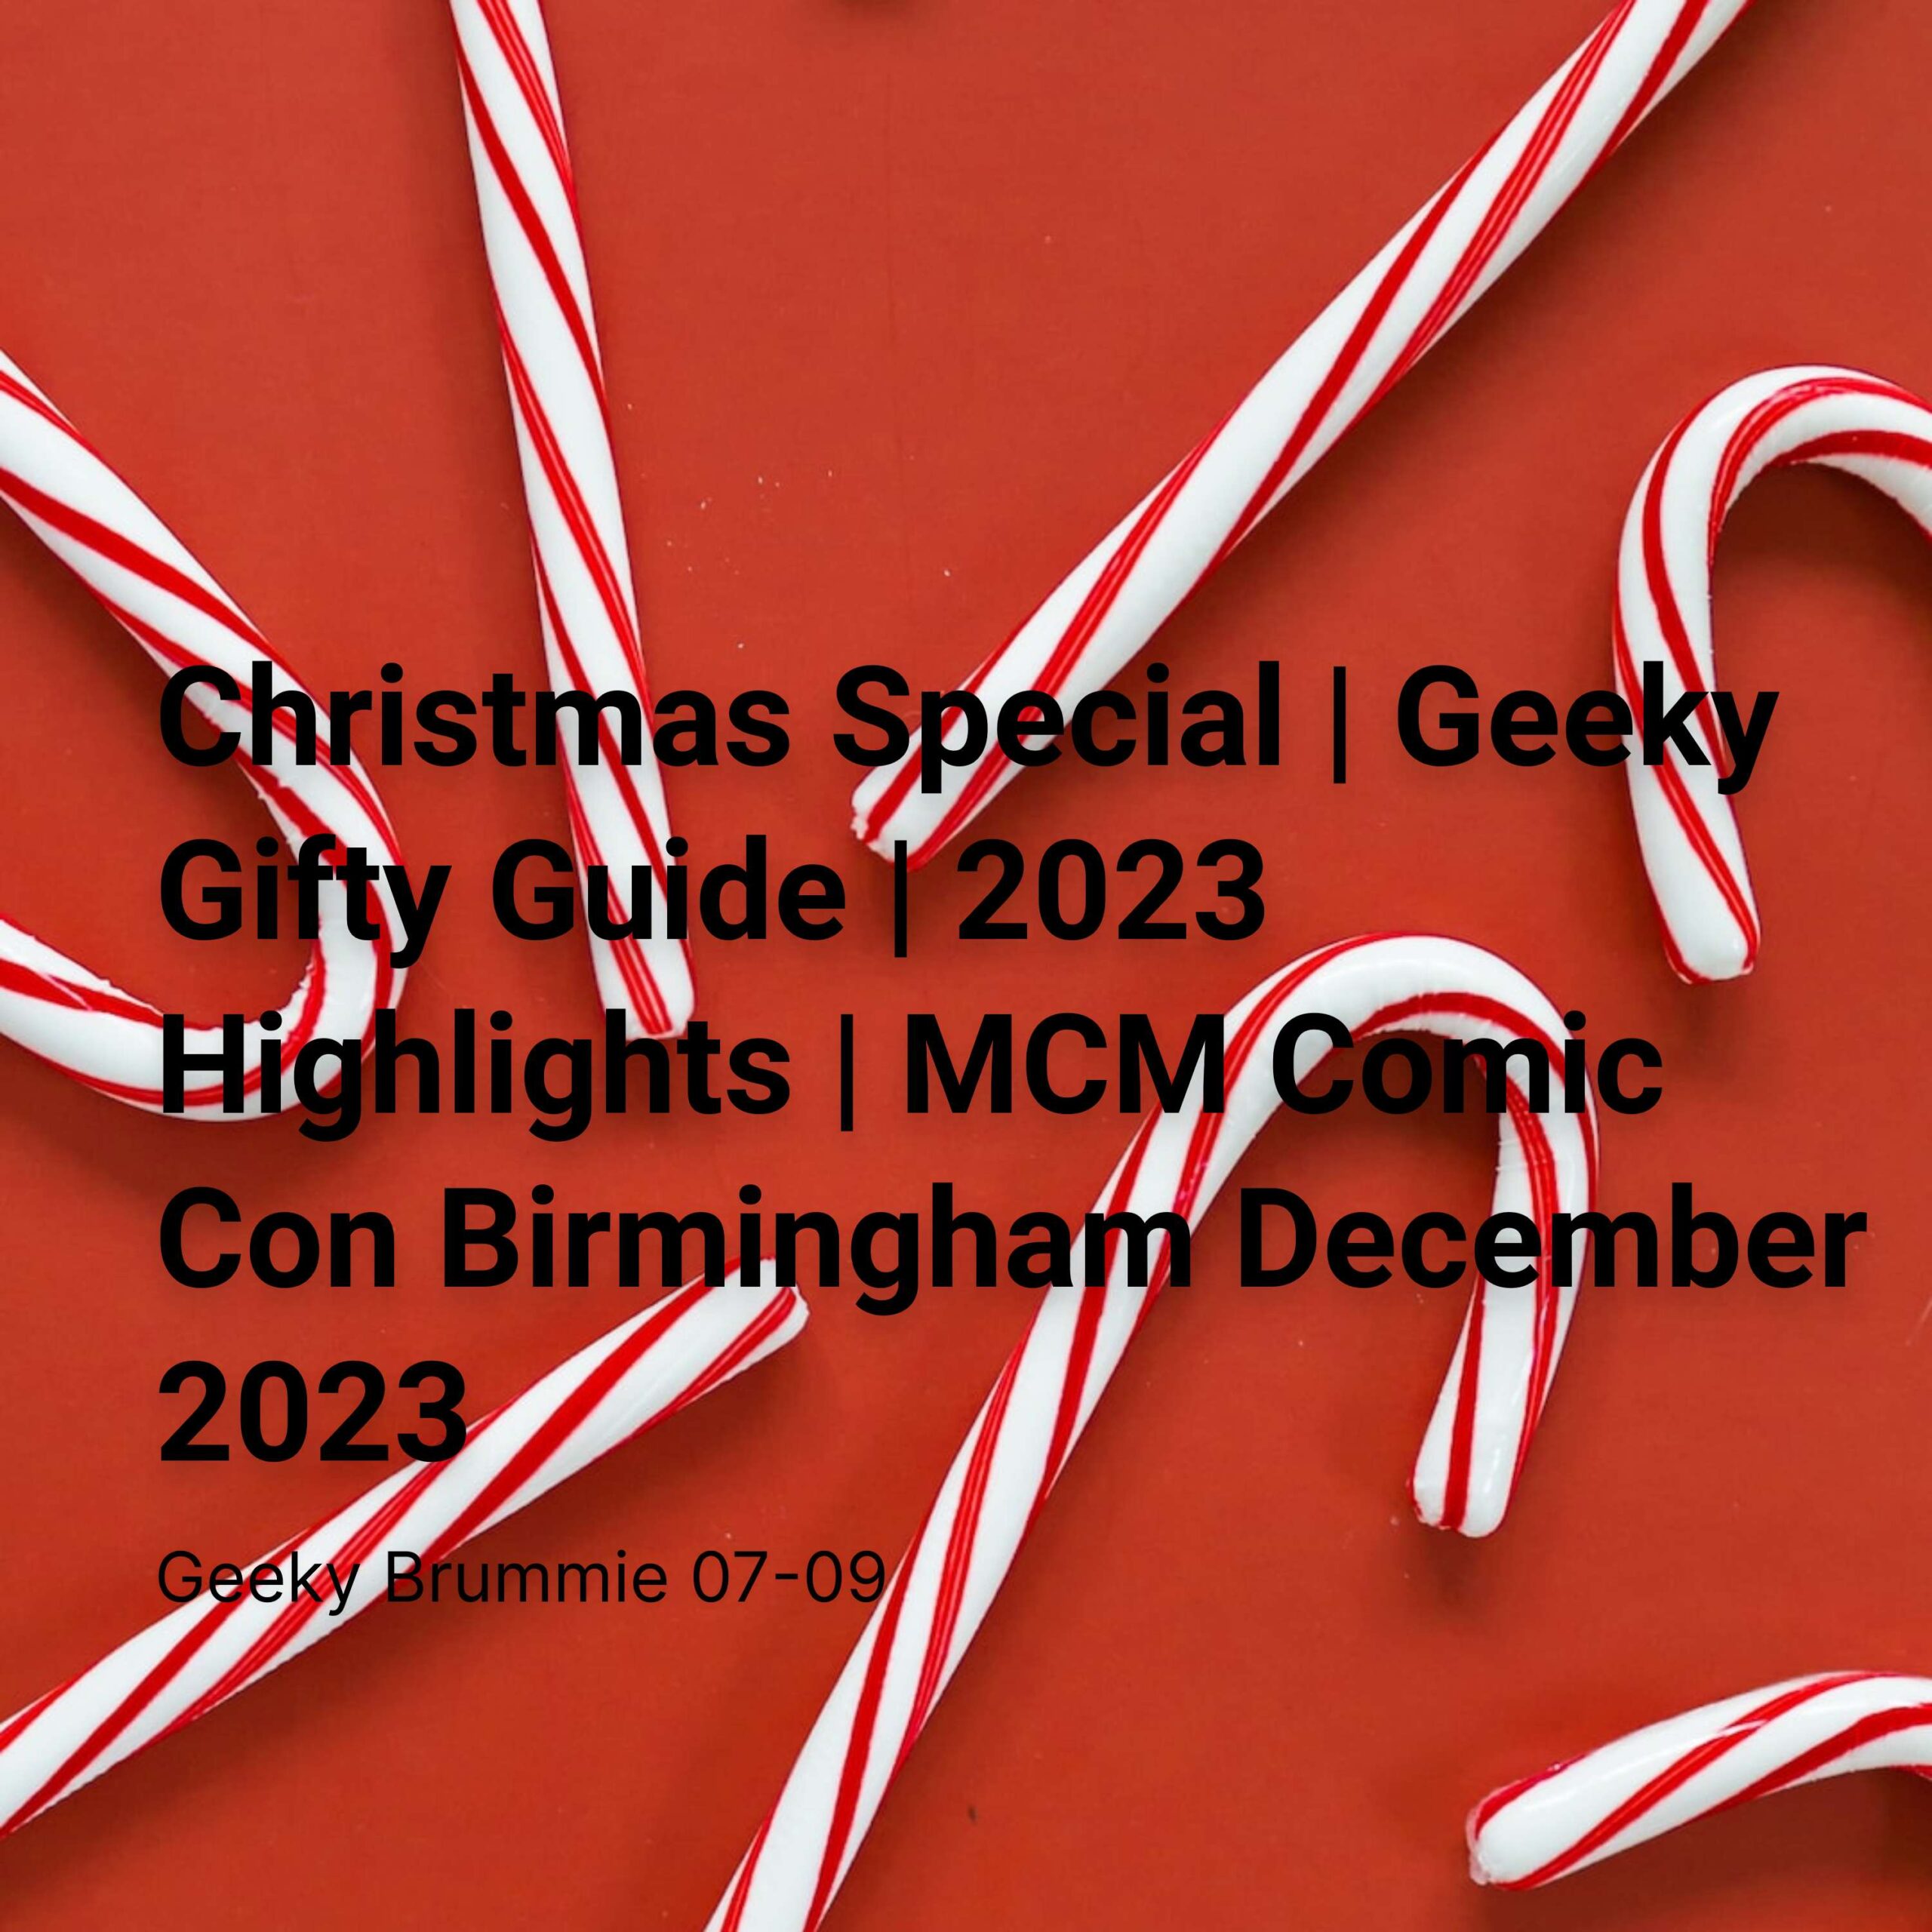 Christmas Special | Geeky Gifty Guide | 2023 Highlights | MCM Comic Con Birmingham December 2023